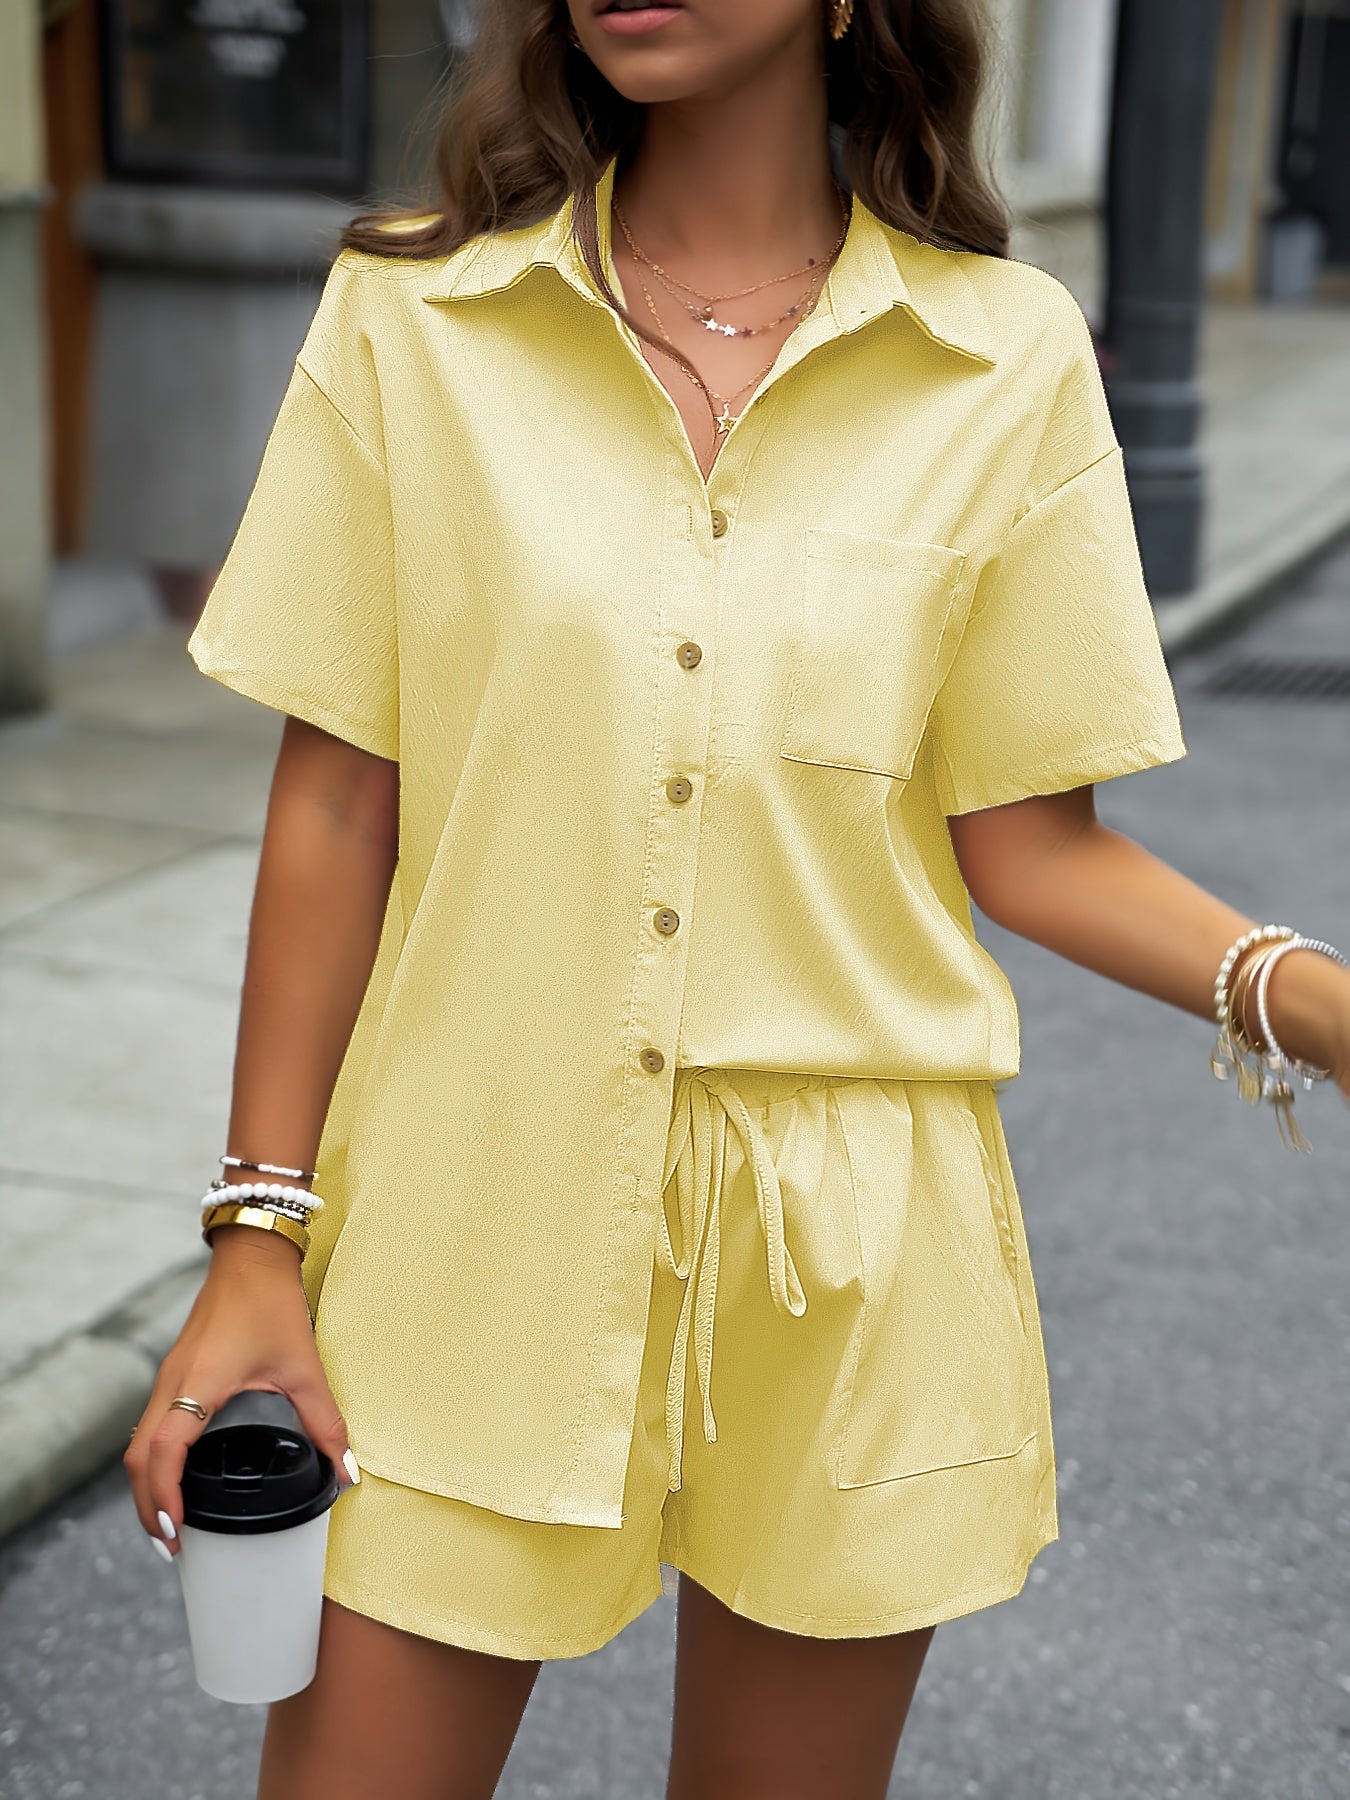 Solid Casual Two-piece Set, Button Front Turn Down Collar Mid Length Shirt & Drawstring Elastic Waist Shorts Outfits, Women's Clothing